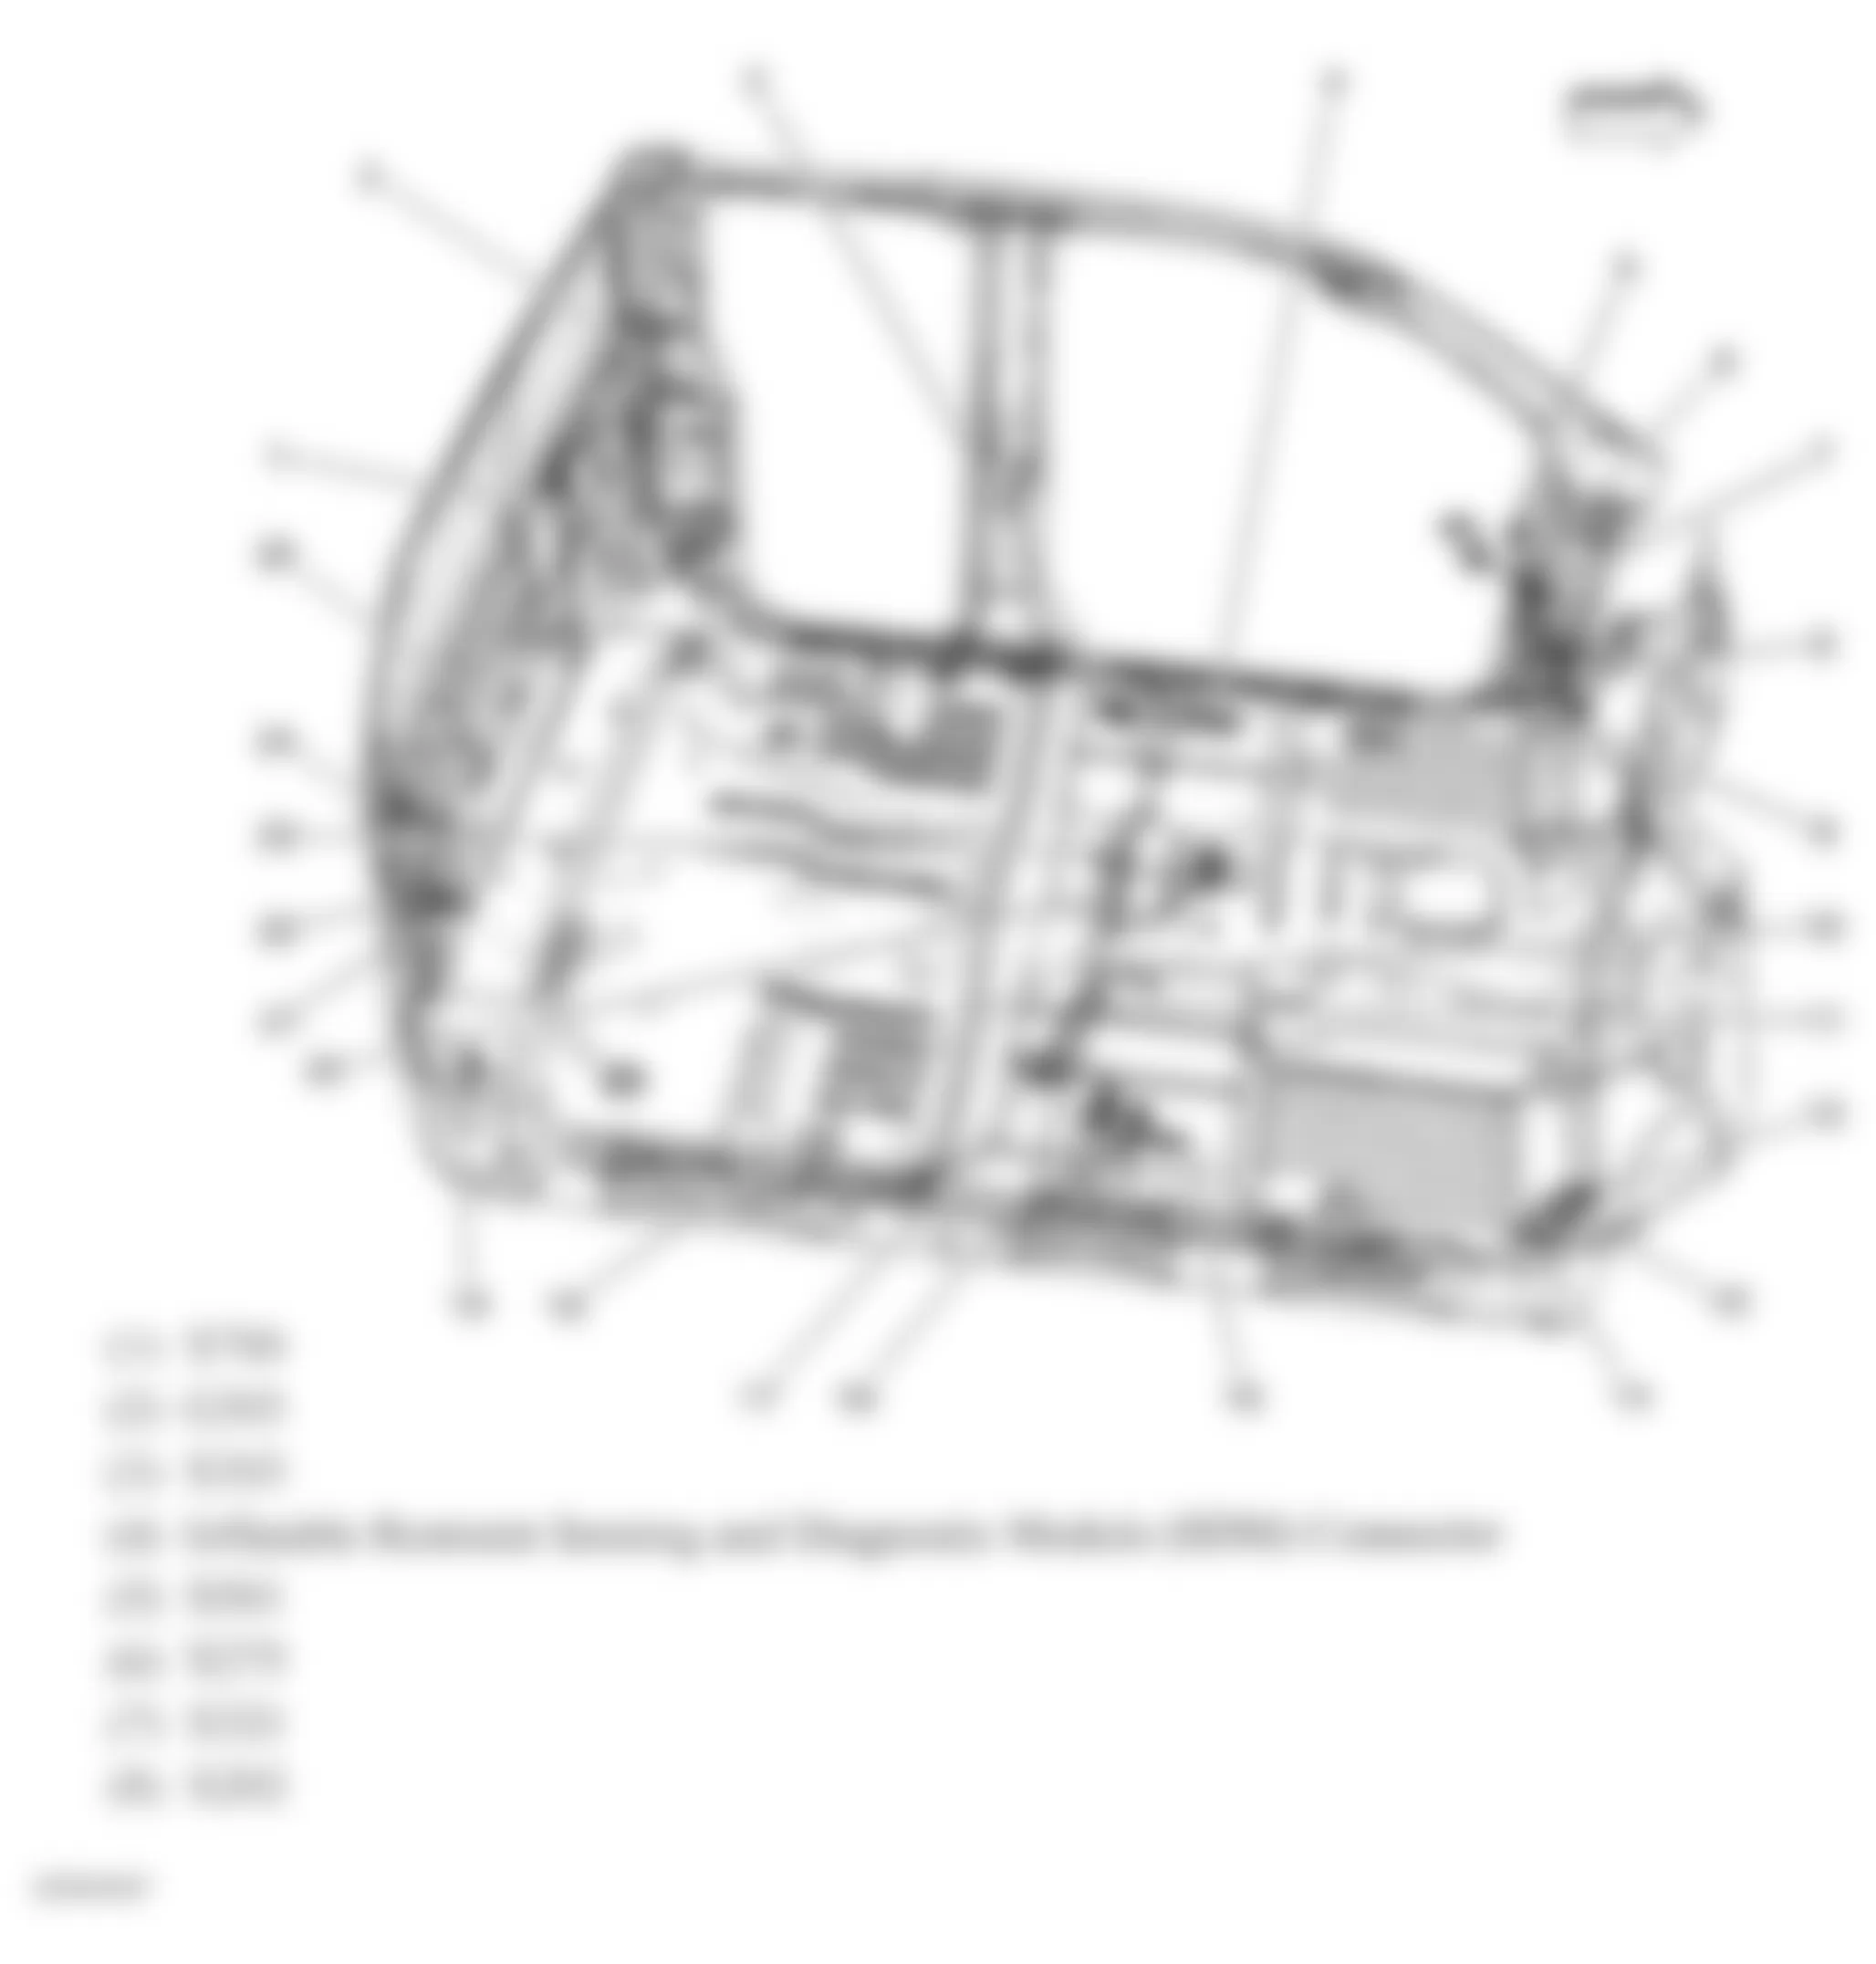 GMC Sierra 1500 2008 - Component Locations -  Passenger Compartment (Extended Cab) (1 Of 2)